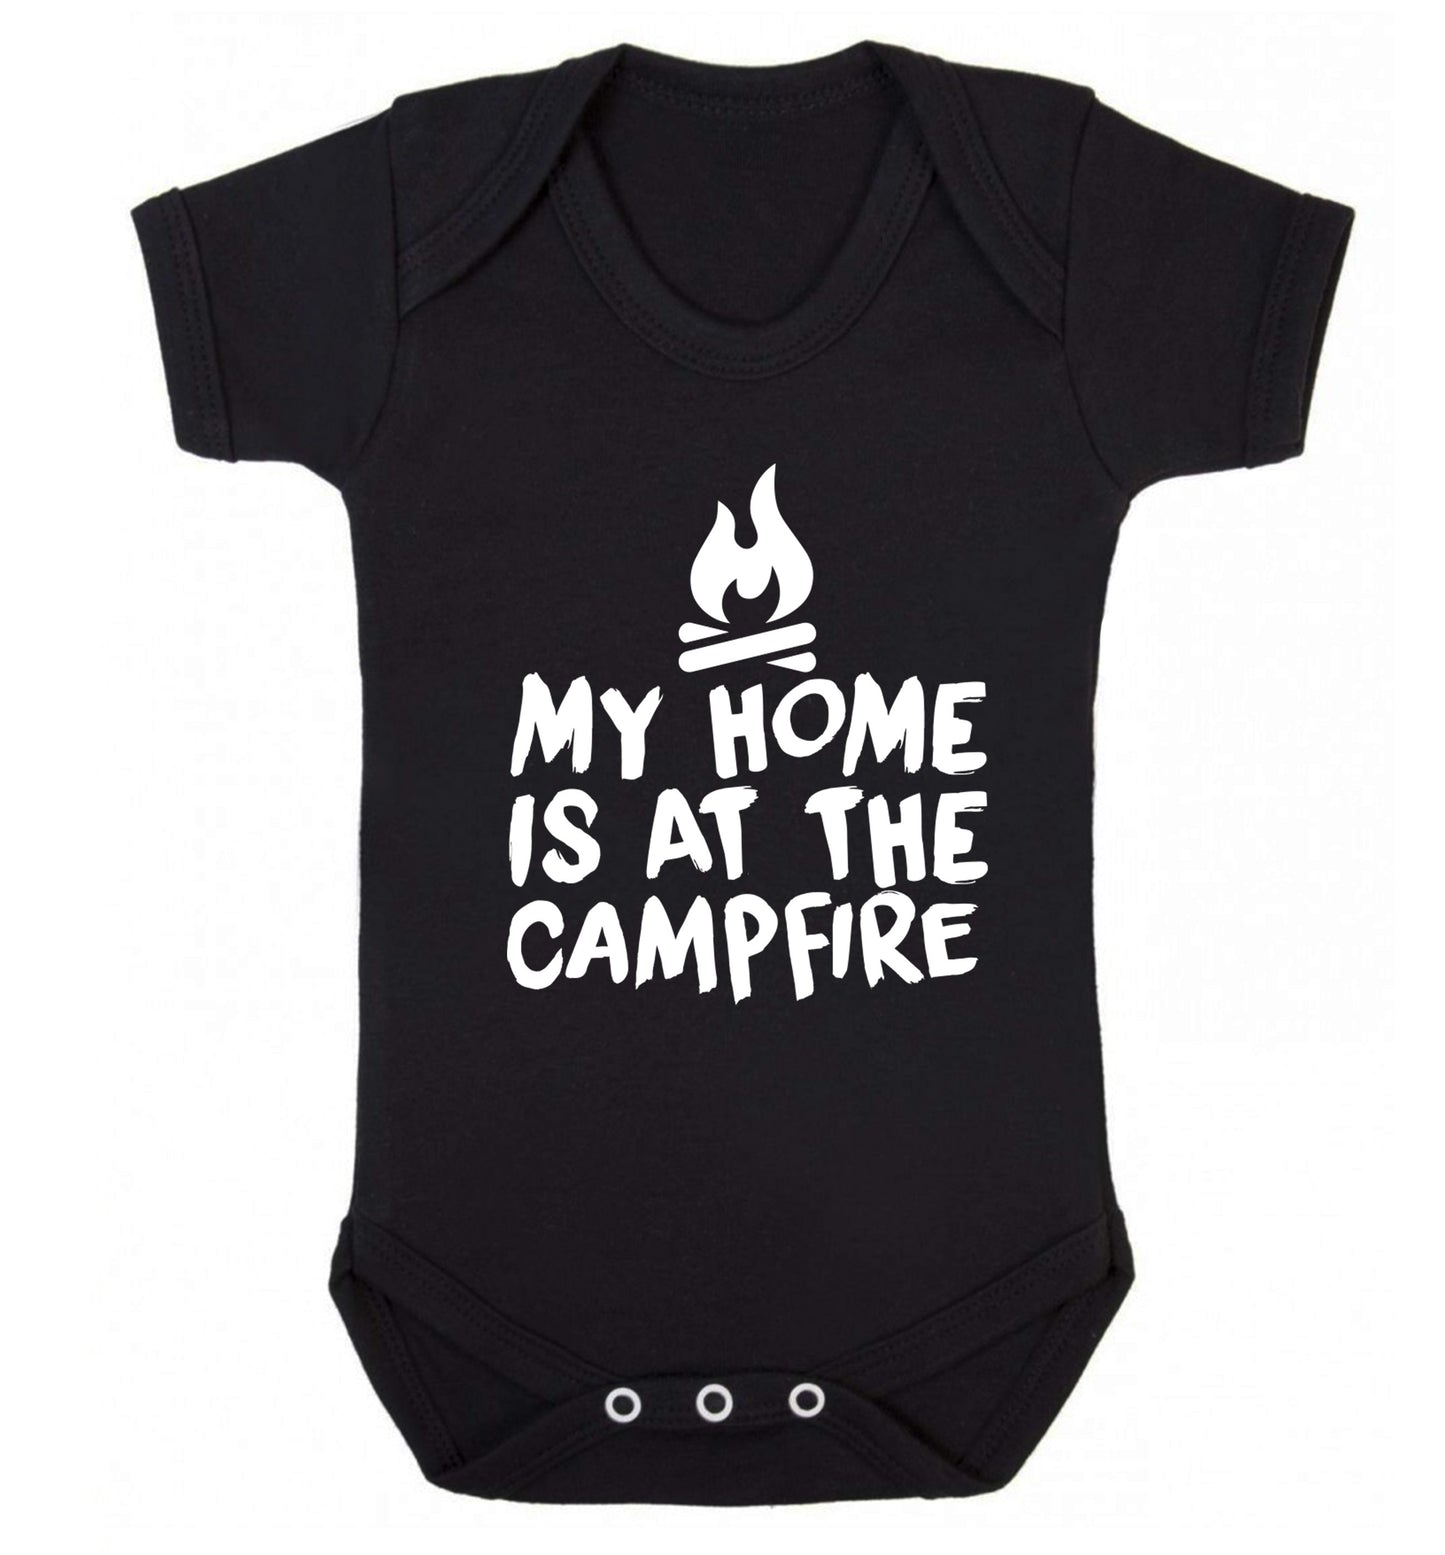 My home is at the campfire Baby Vest black 18-24 months